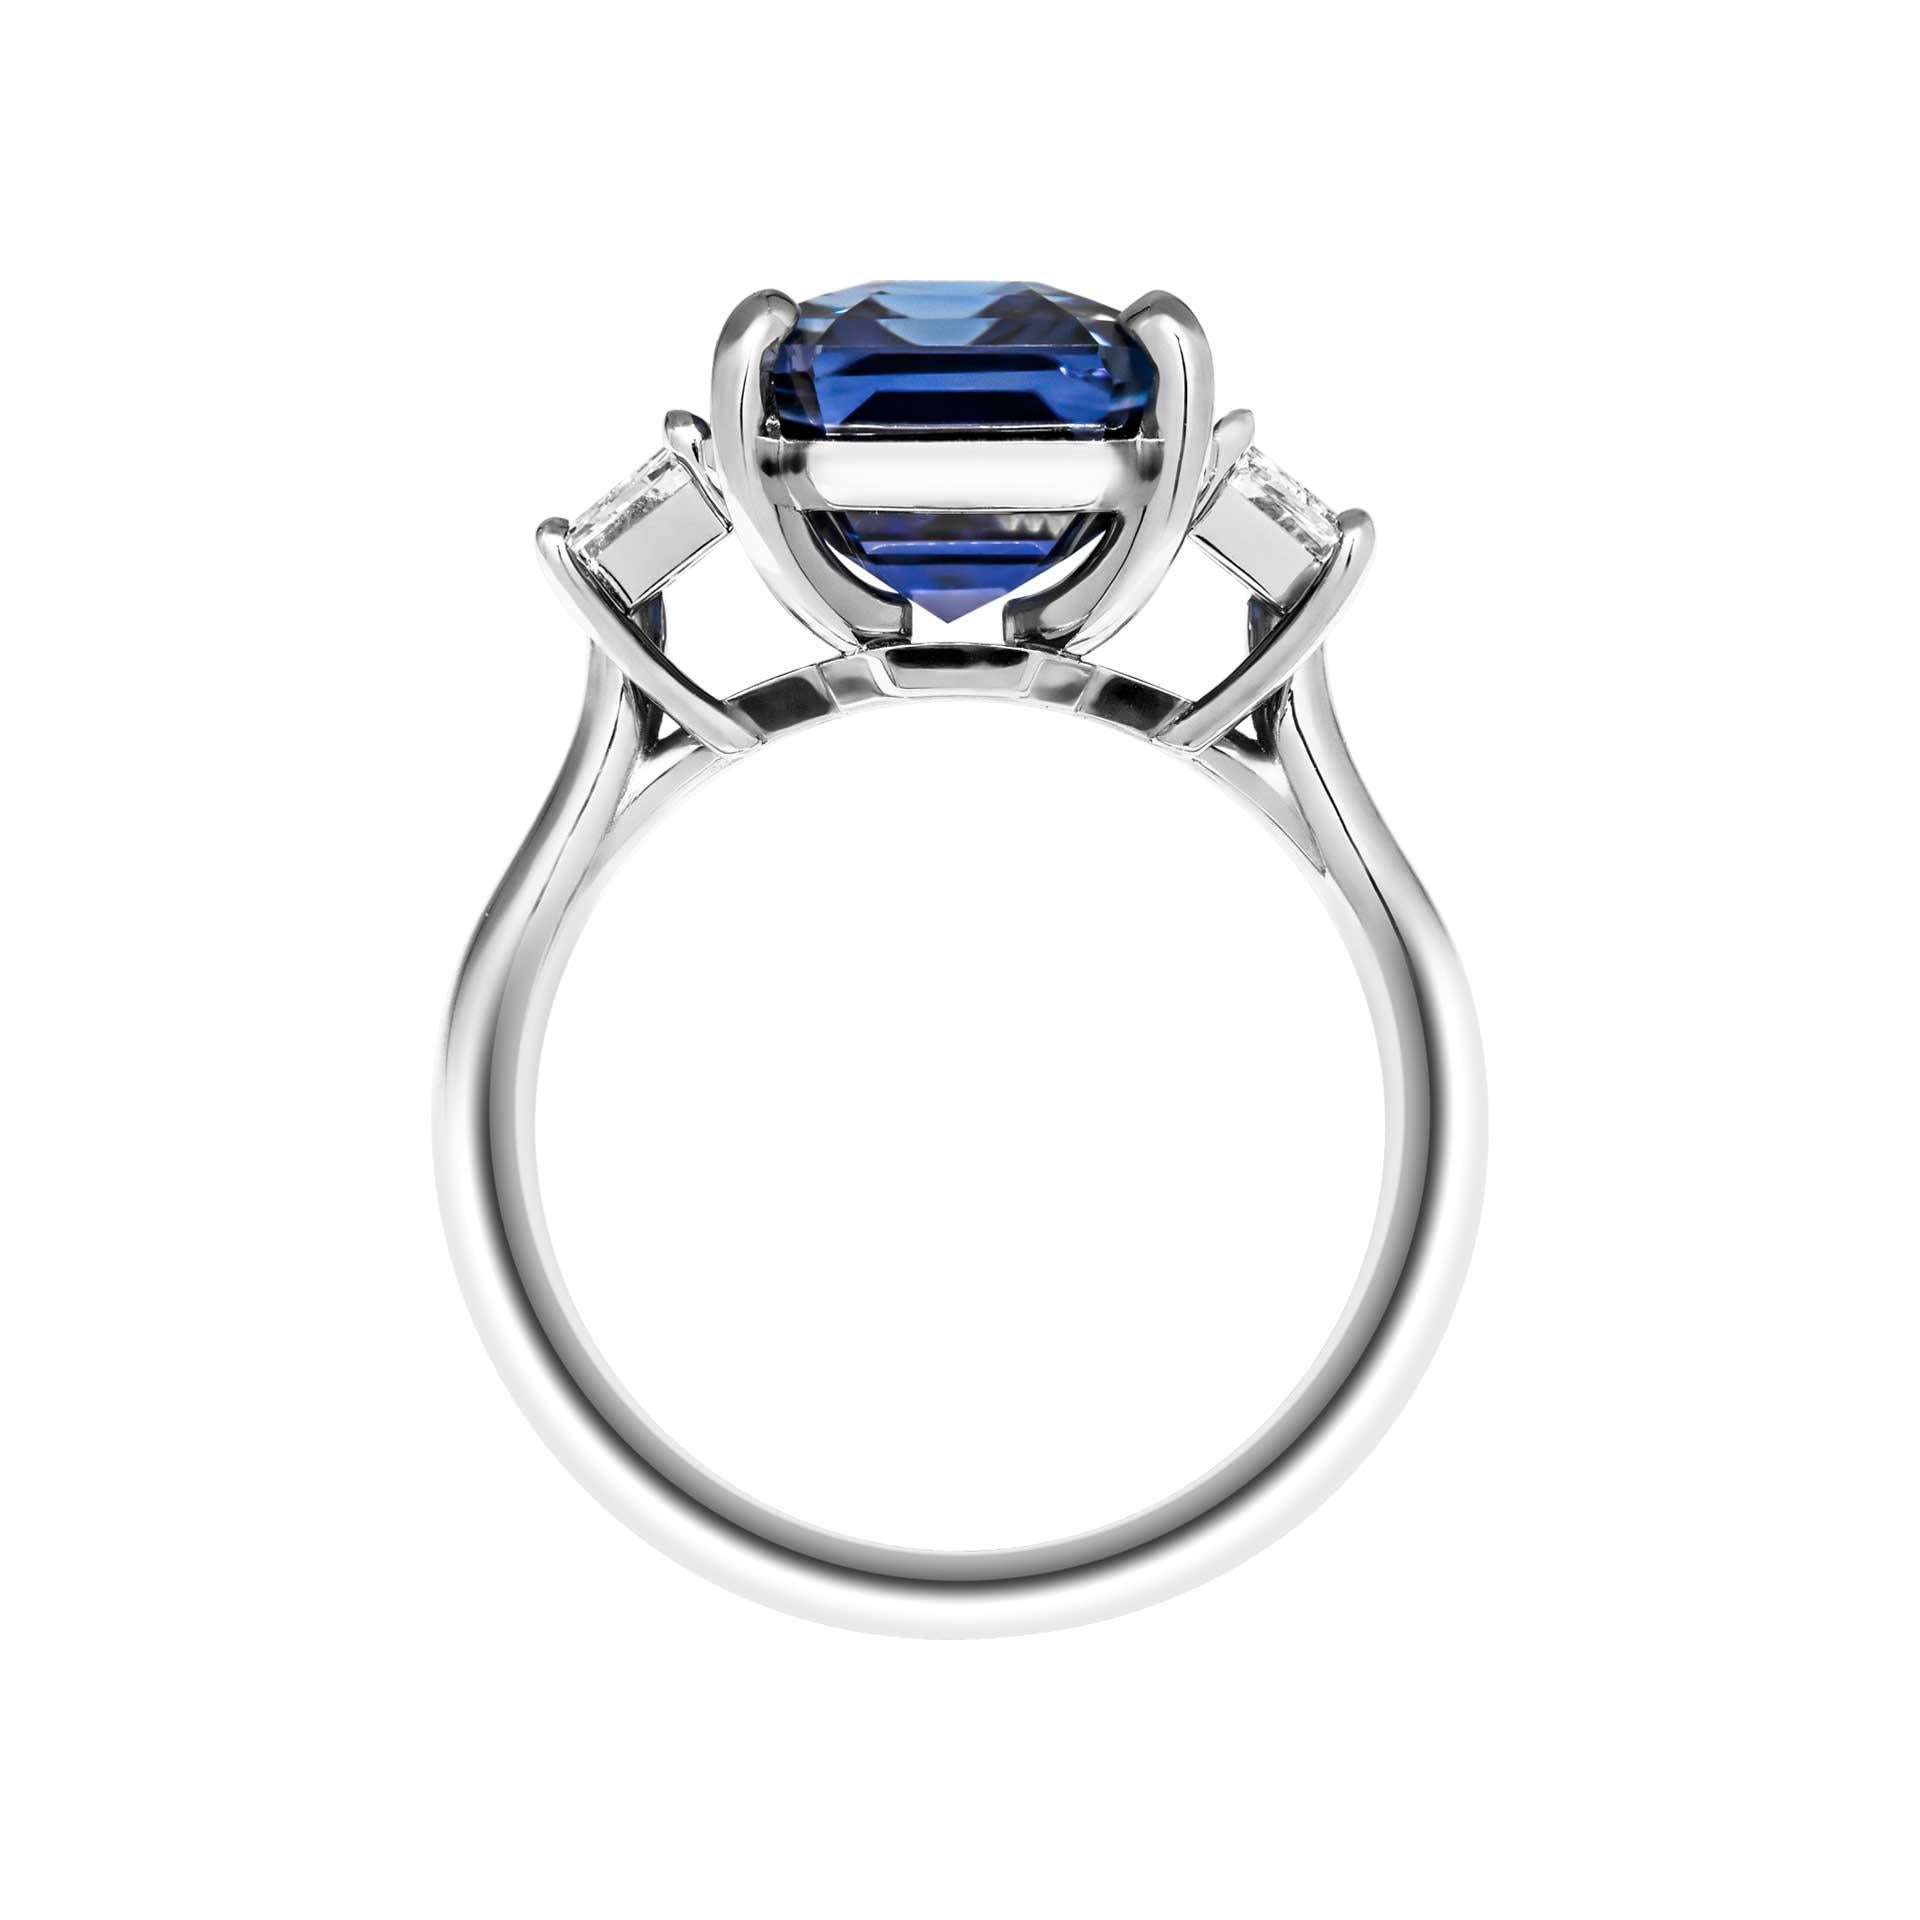 Emerald Cut GIA Certified 3 Stone Ring with Blue Sapphire